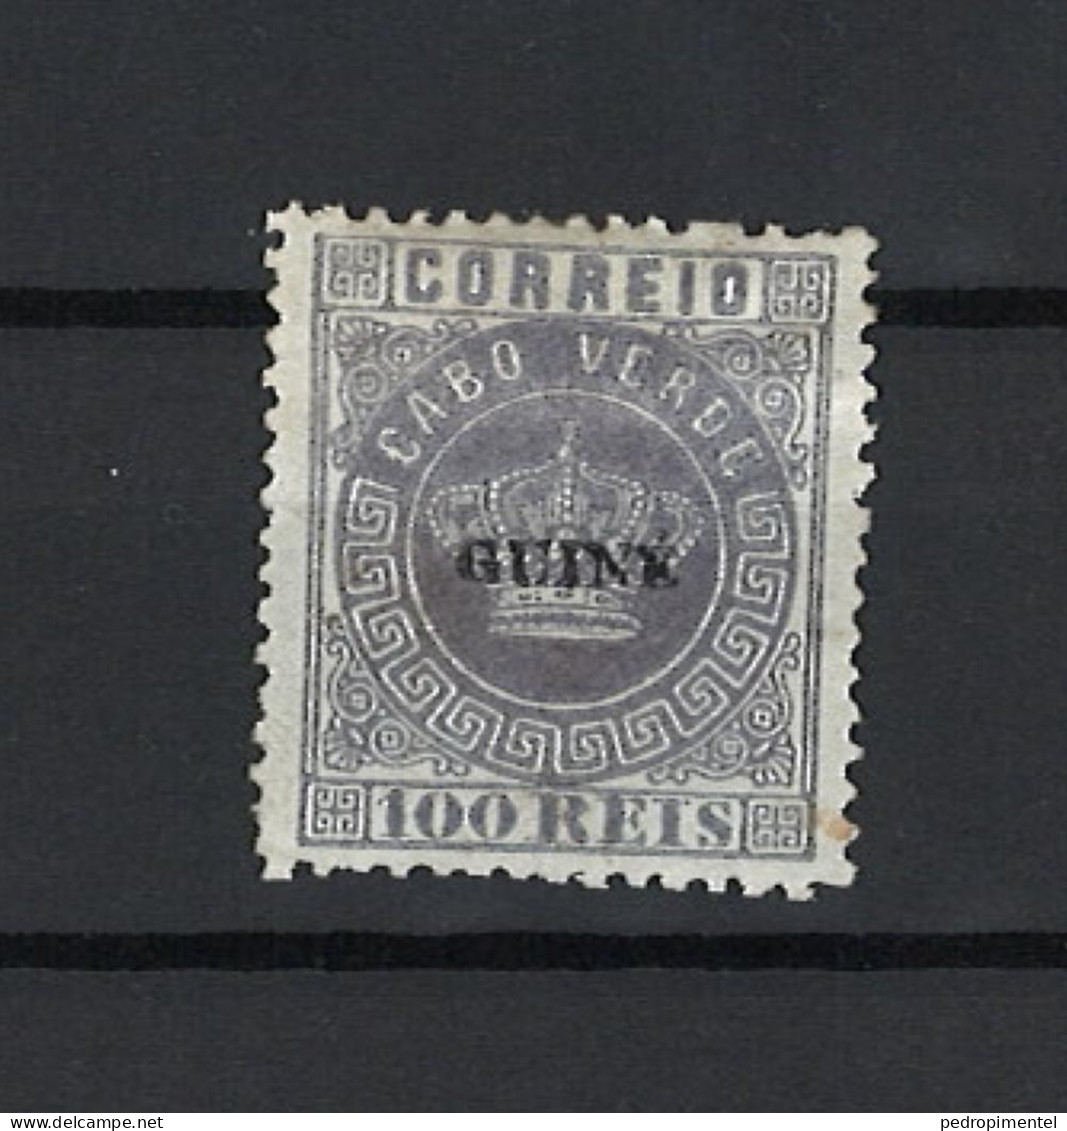 Portugal Guinee 1879-82 First Issue (Crown With Small GUINE Surcharge) 100 Reis Condition MH NGAI Mundifil Guinee #7 - Guinea Portuguesa